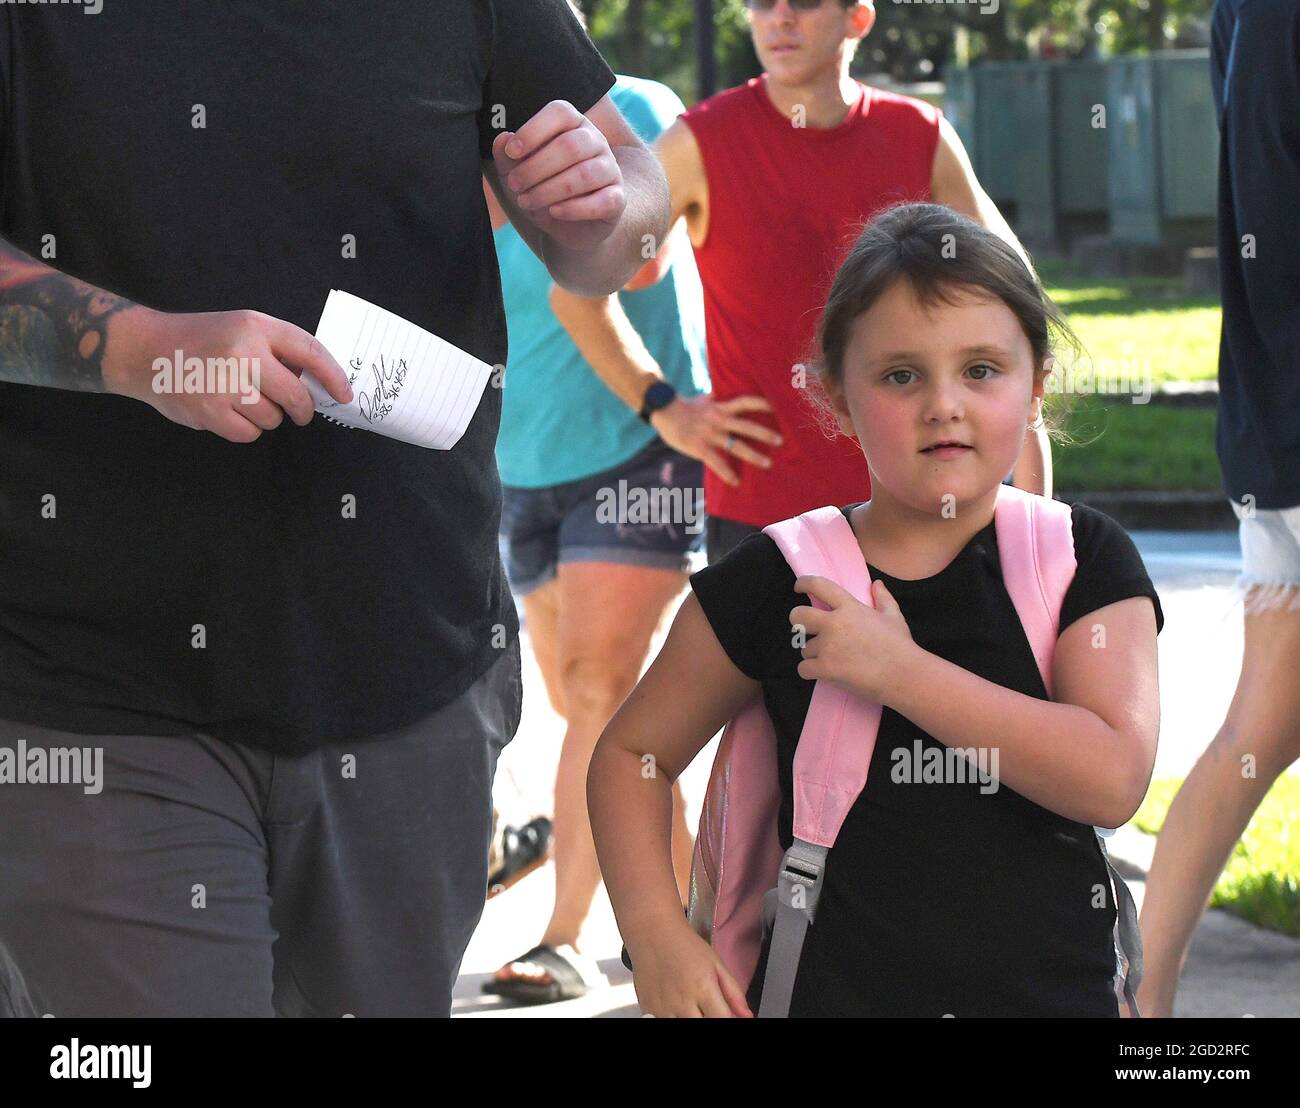 Orlando, United States. 10th Aug, 2021. A young girl arrives on the first day of classes for the 2021-22 school year at Baldwin Park Elementary School. Due to the current surge in COVID-19 cases in Florida, Orange County public schools have implemented a face mask mandate for students for 30 days unless a parent chooses to opt out of the requirement. Credit: SOPA Images Limited/Alamy Live News Stock Photo